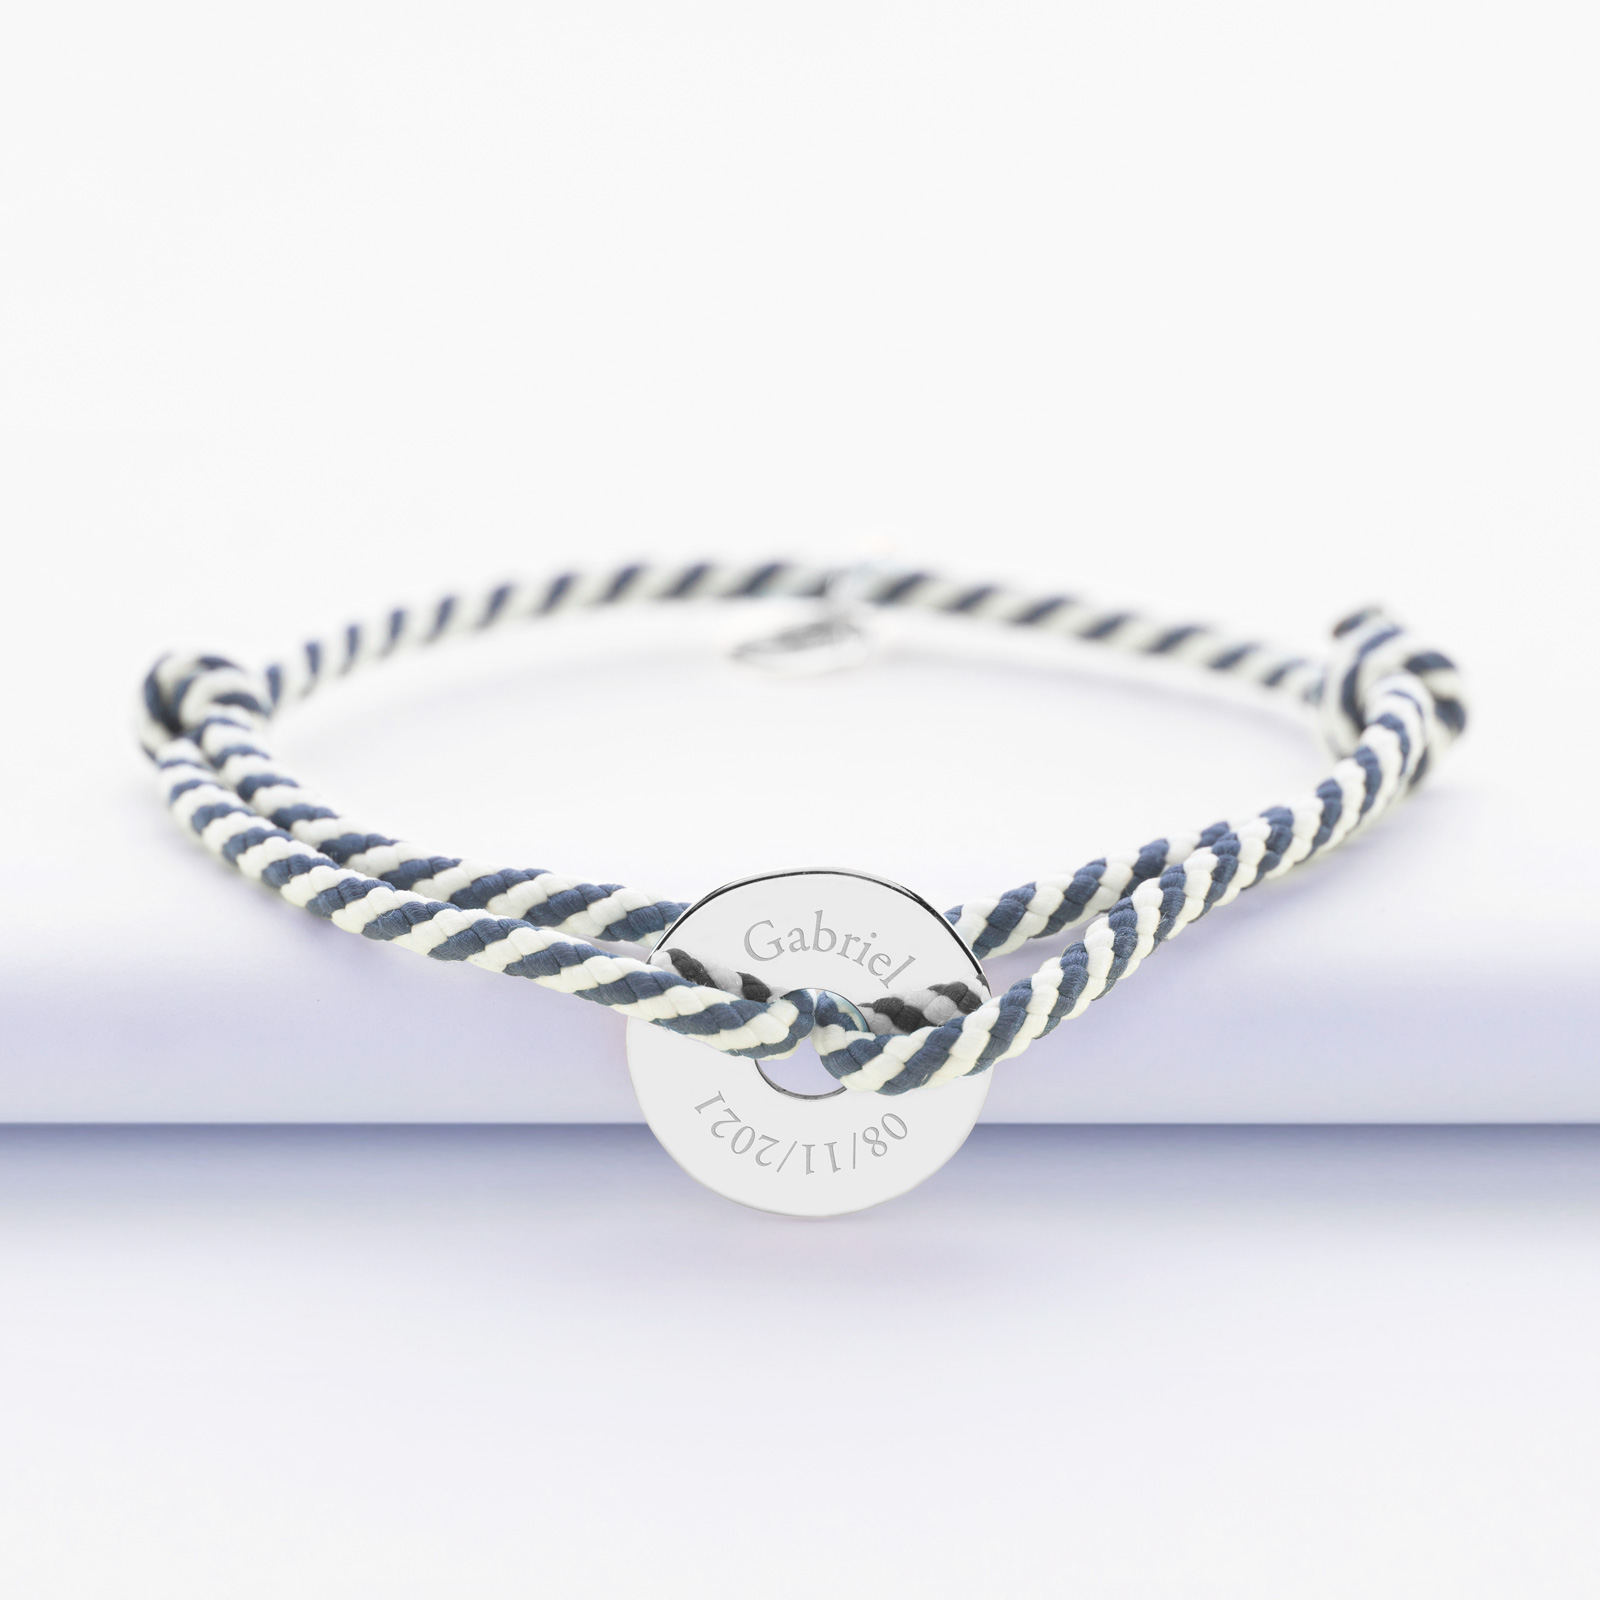 Men's Marine Cord Personalised Bracelet with 16 mm Silver Engraved Open Disc